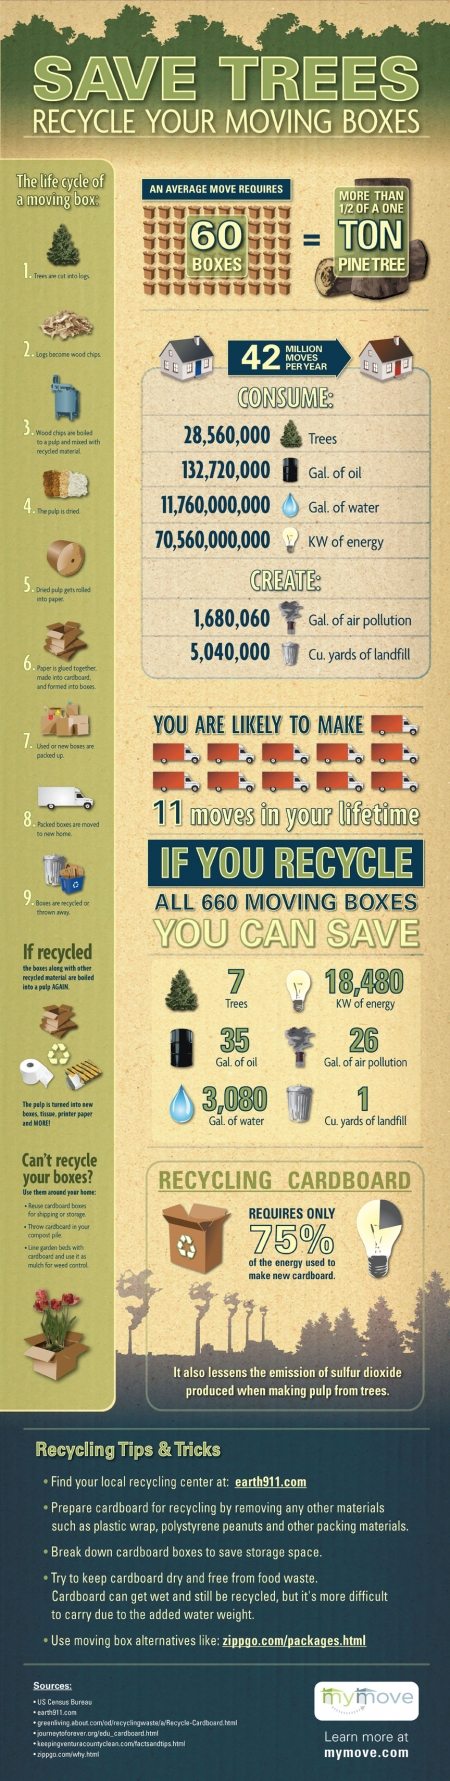 recycle moving boxes infographic